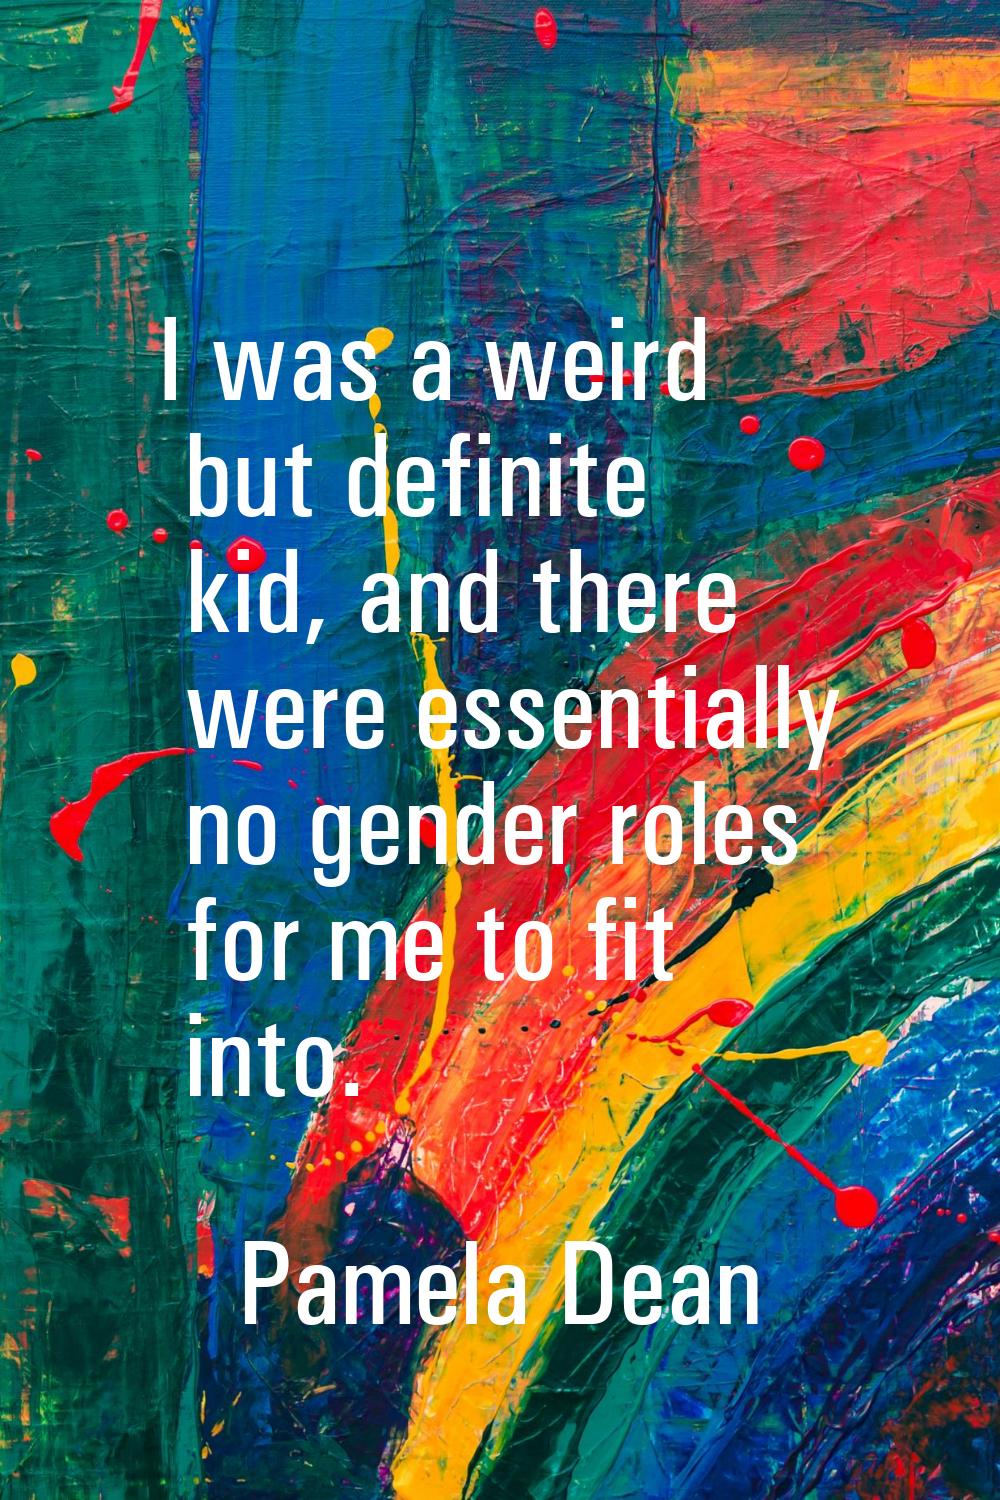 I was a weird but definite kid, and there were essentially no gender roles for me to fit into.